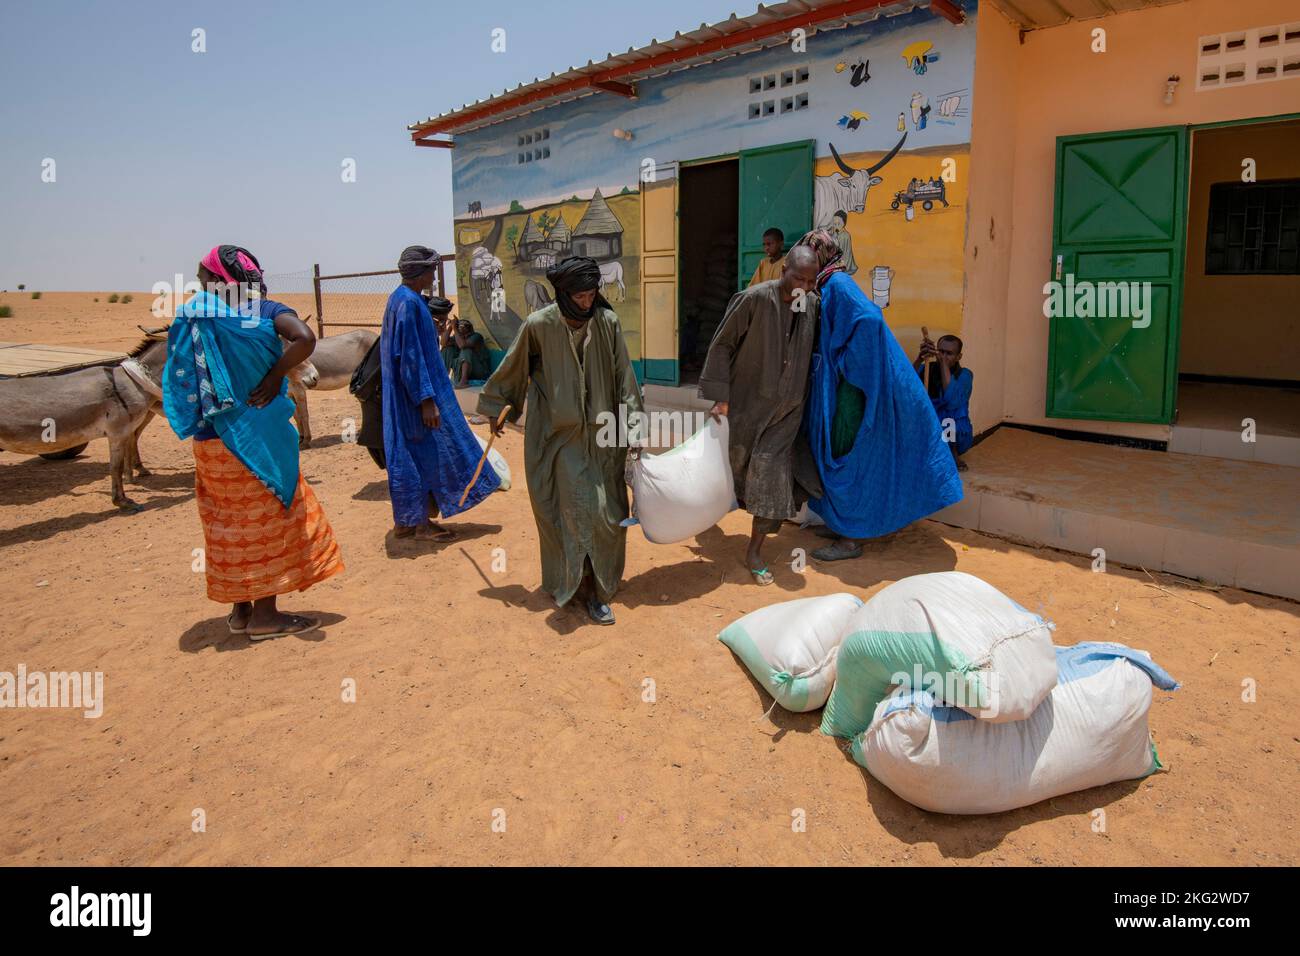 Loading of livestock food by members of a dairy farmers' cooperative in Northern Senegal Stock Photo